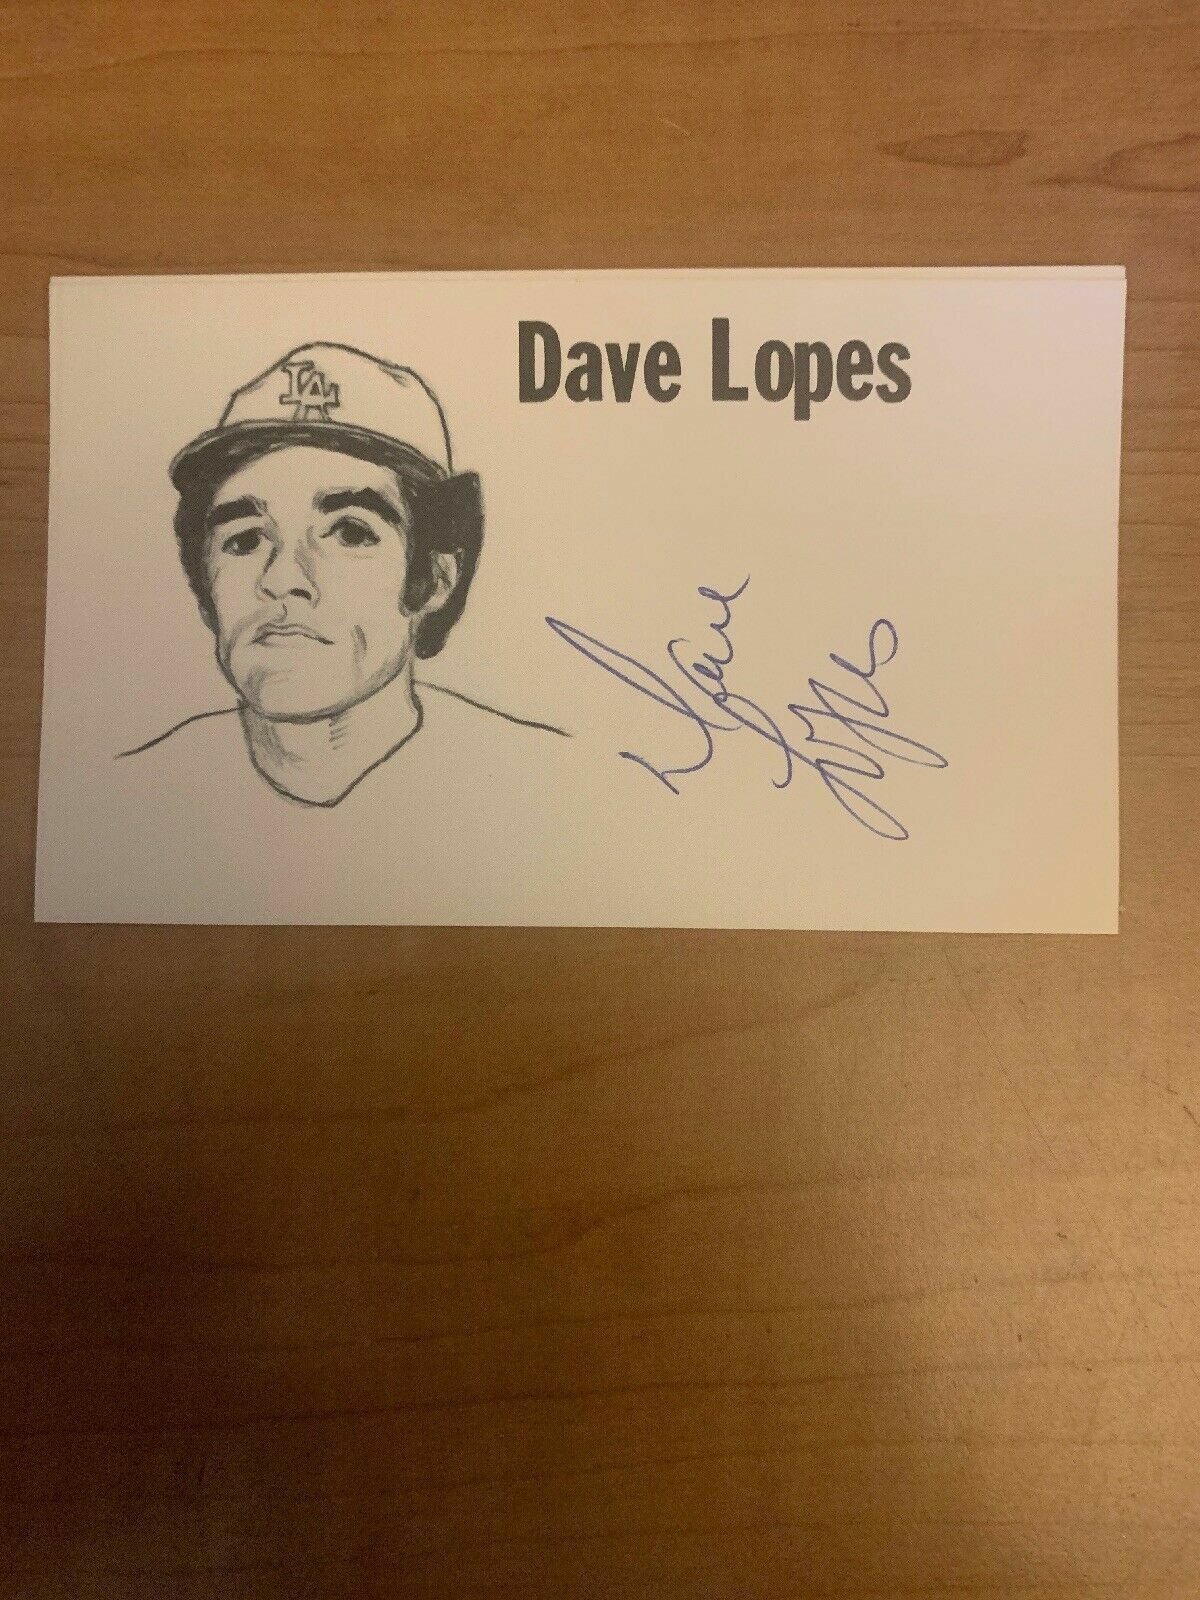 DAVE LOPES - BASEBALL - AUTOGRAPH SIGNED - INDEX CARD - AUTHENTIC- B6456